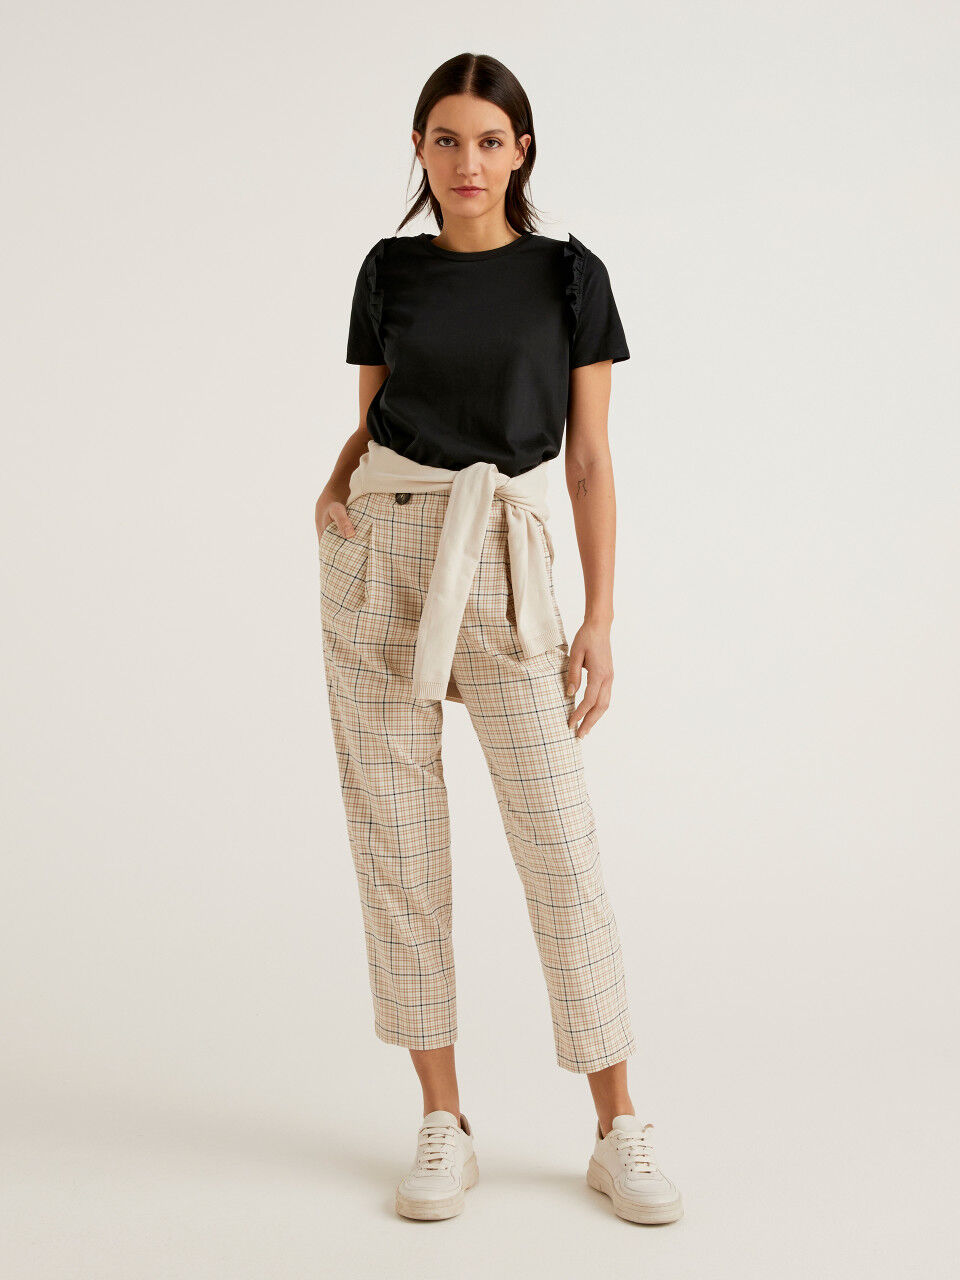 Reiss Craft Slim Fit Cotton-Linen Check Adjustable Trousers | REISS USA